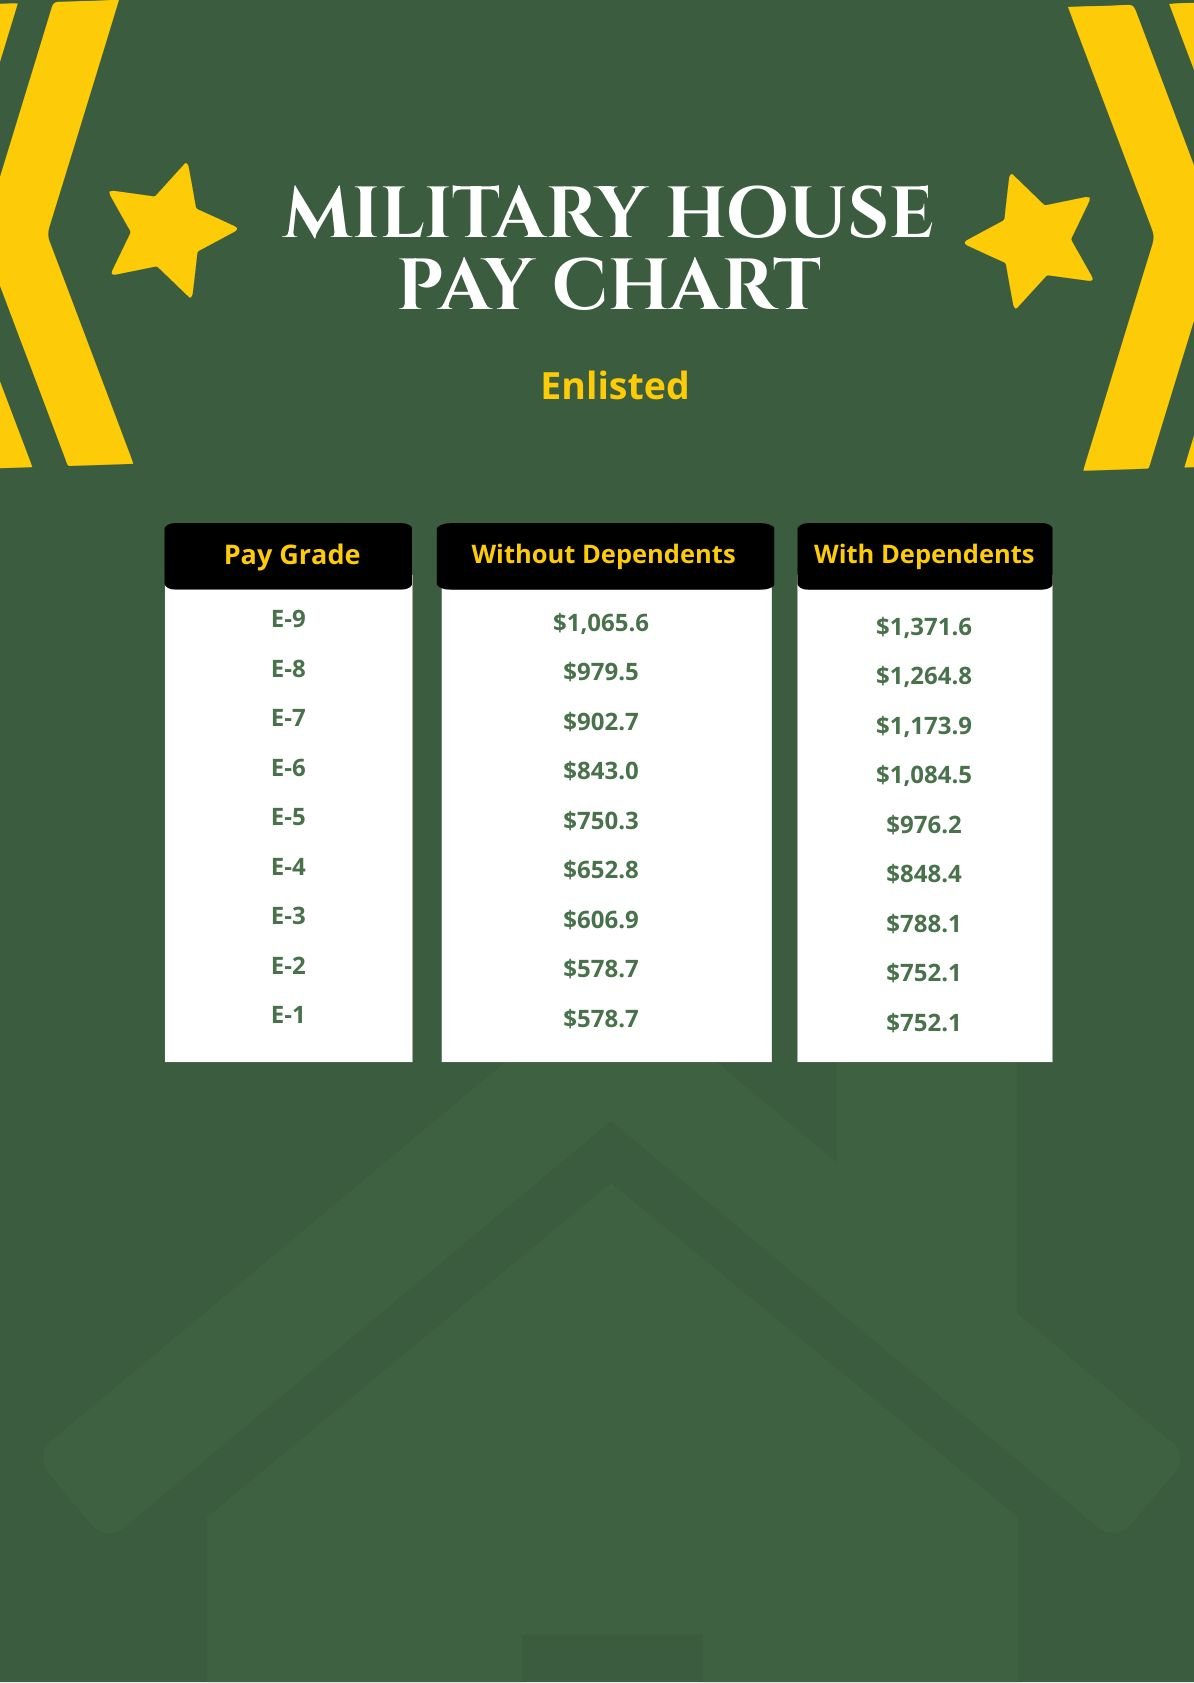 Free Military House Pay Chart in PDF